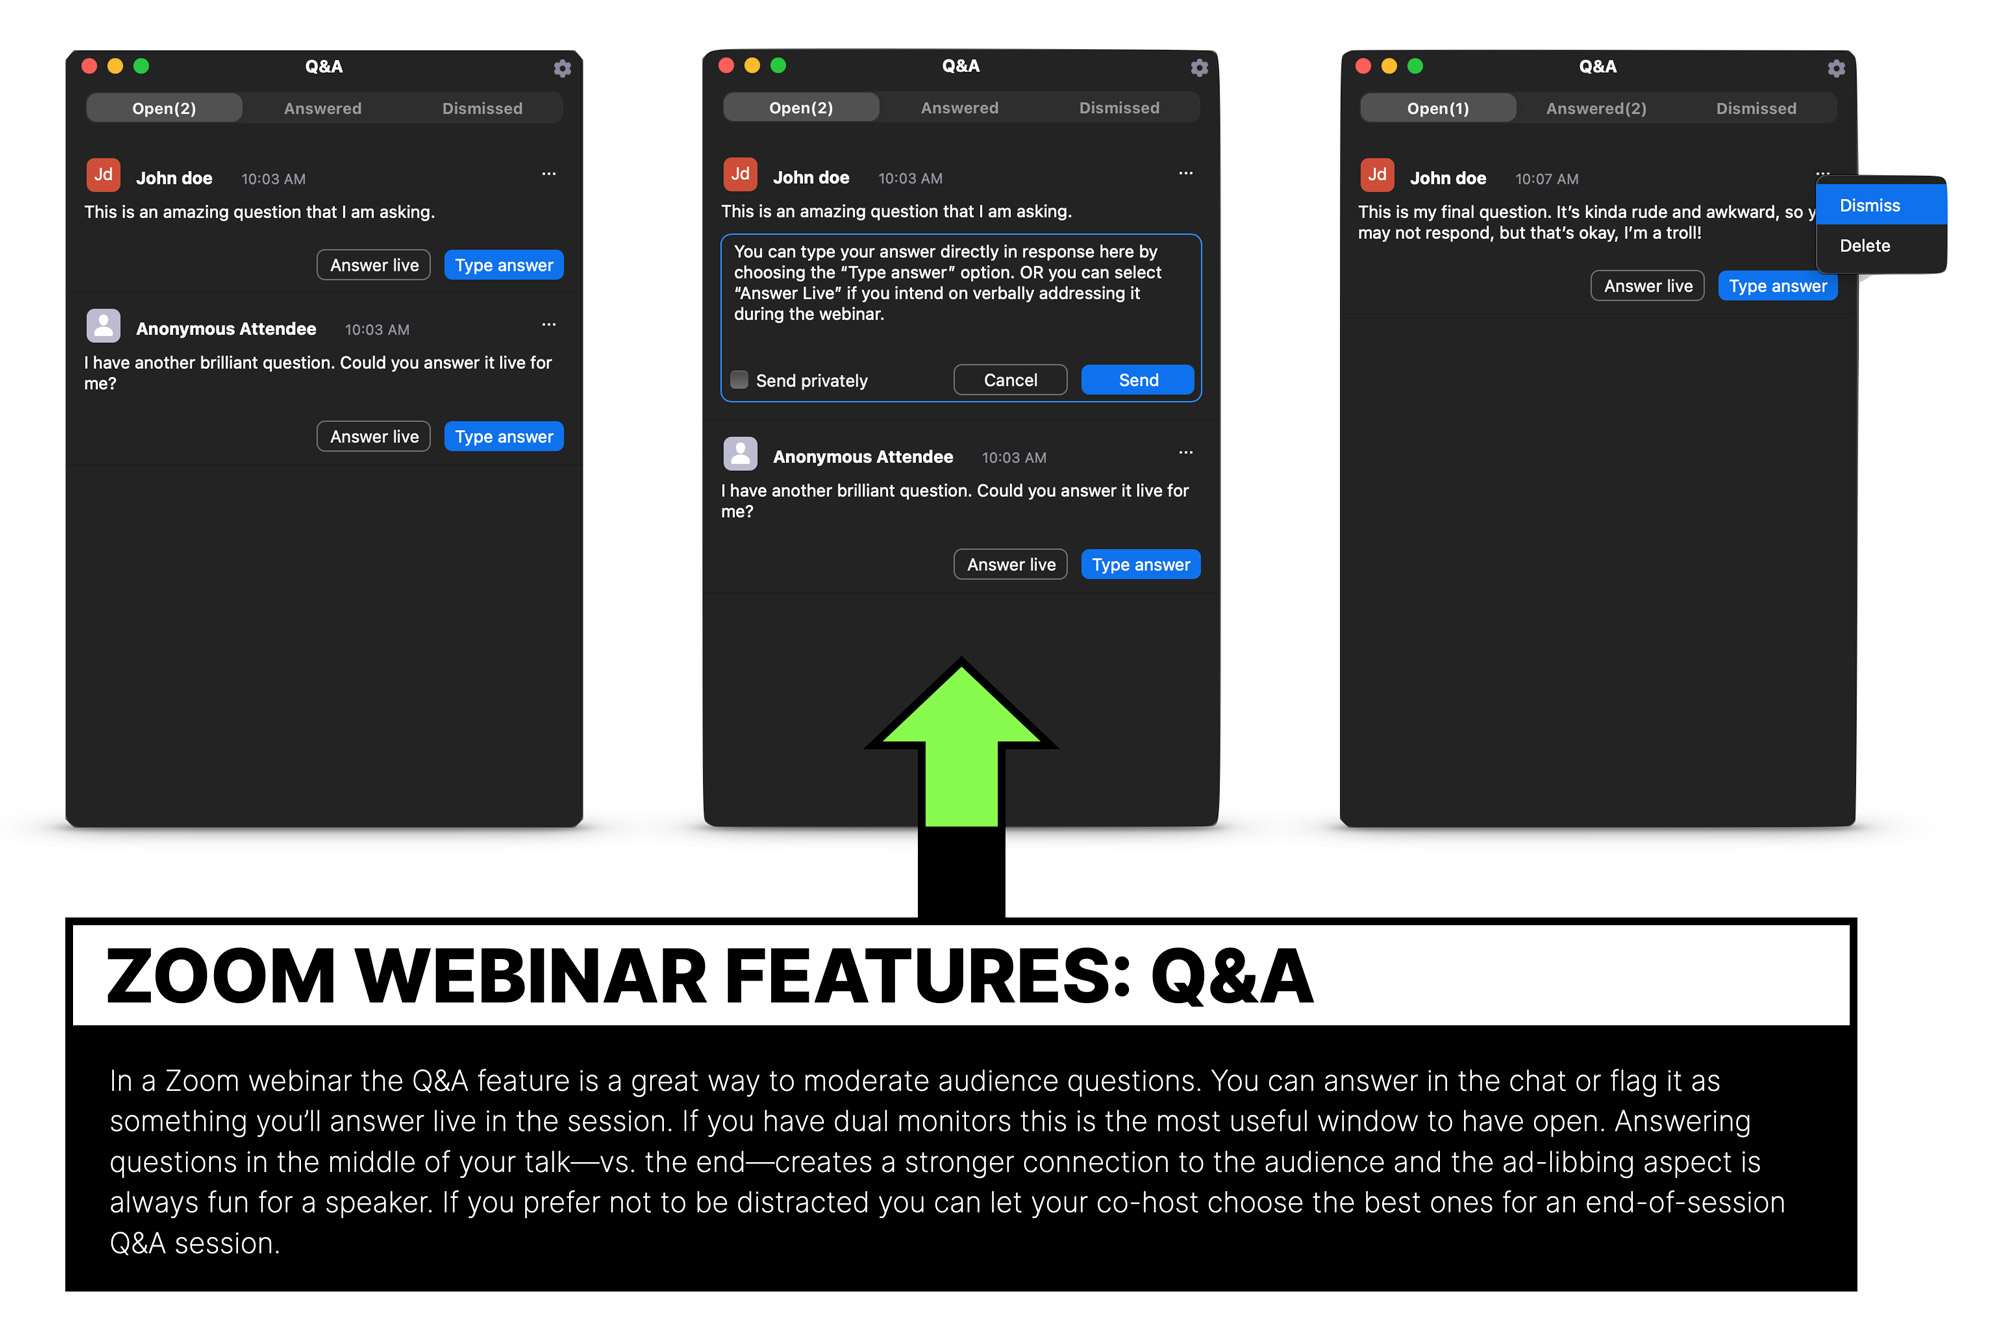 Use the Q&A feature of Zoom webinars to curate audience questions